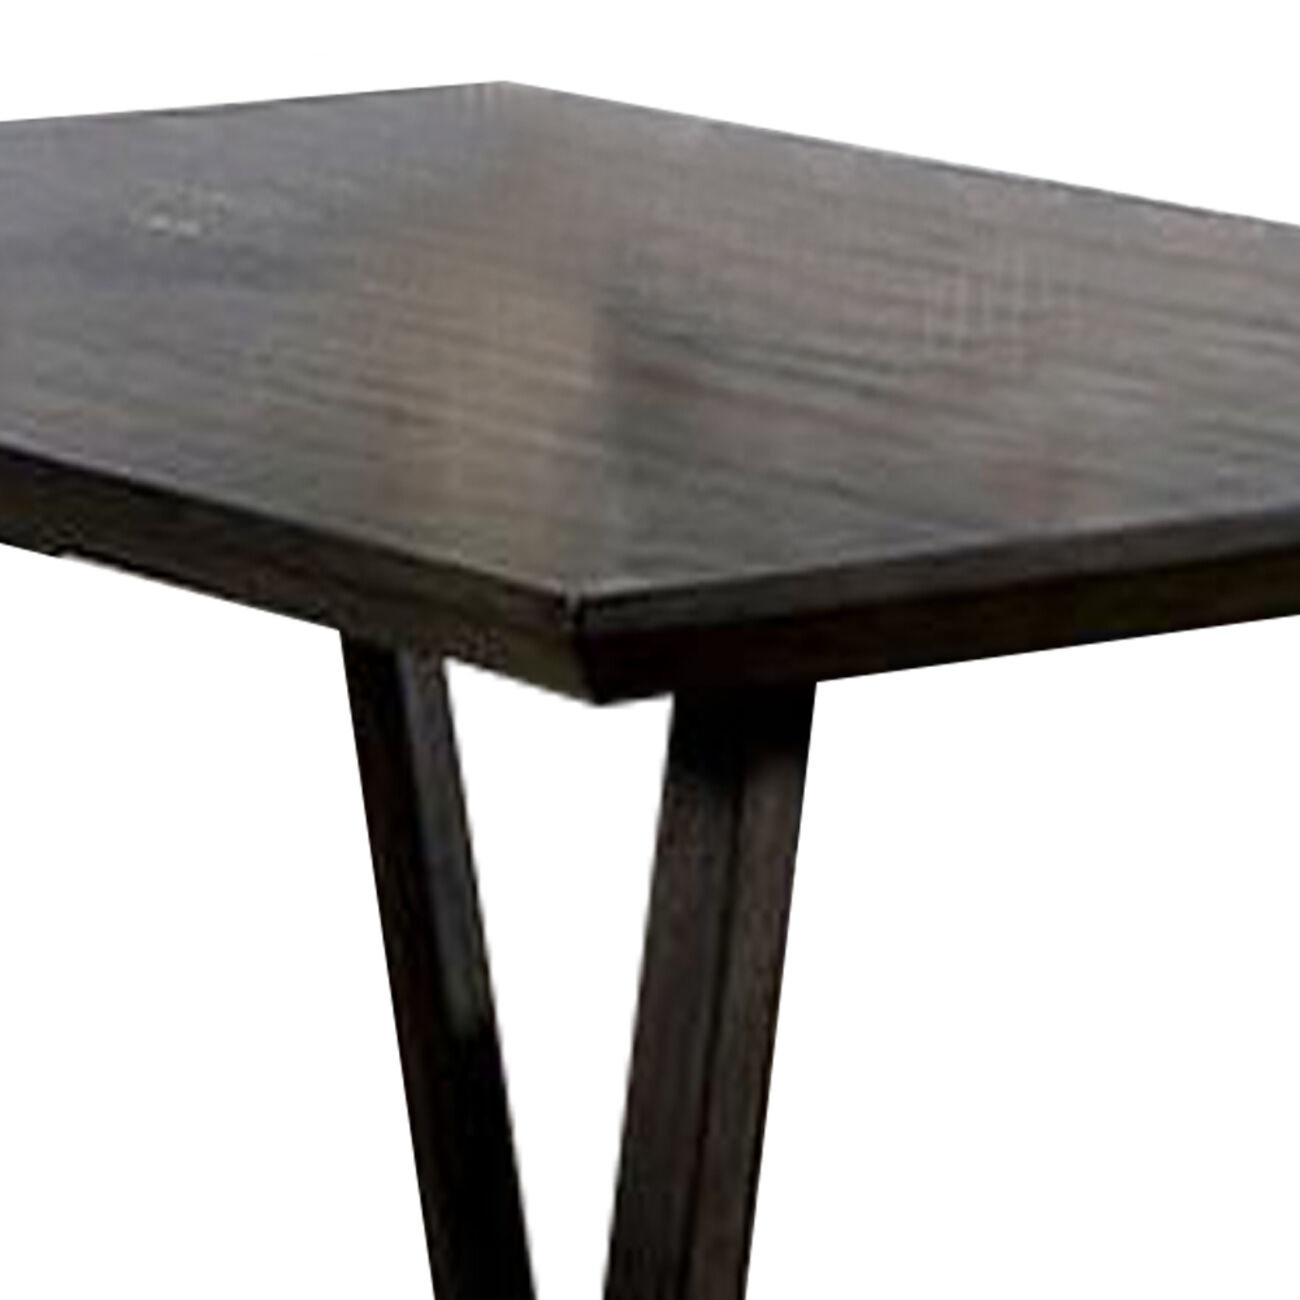 Contemporary Wooden Dining Table with Sled Legs, Walnut Brown